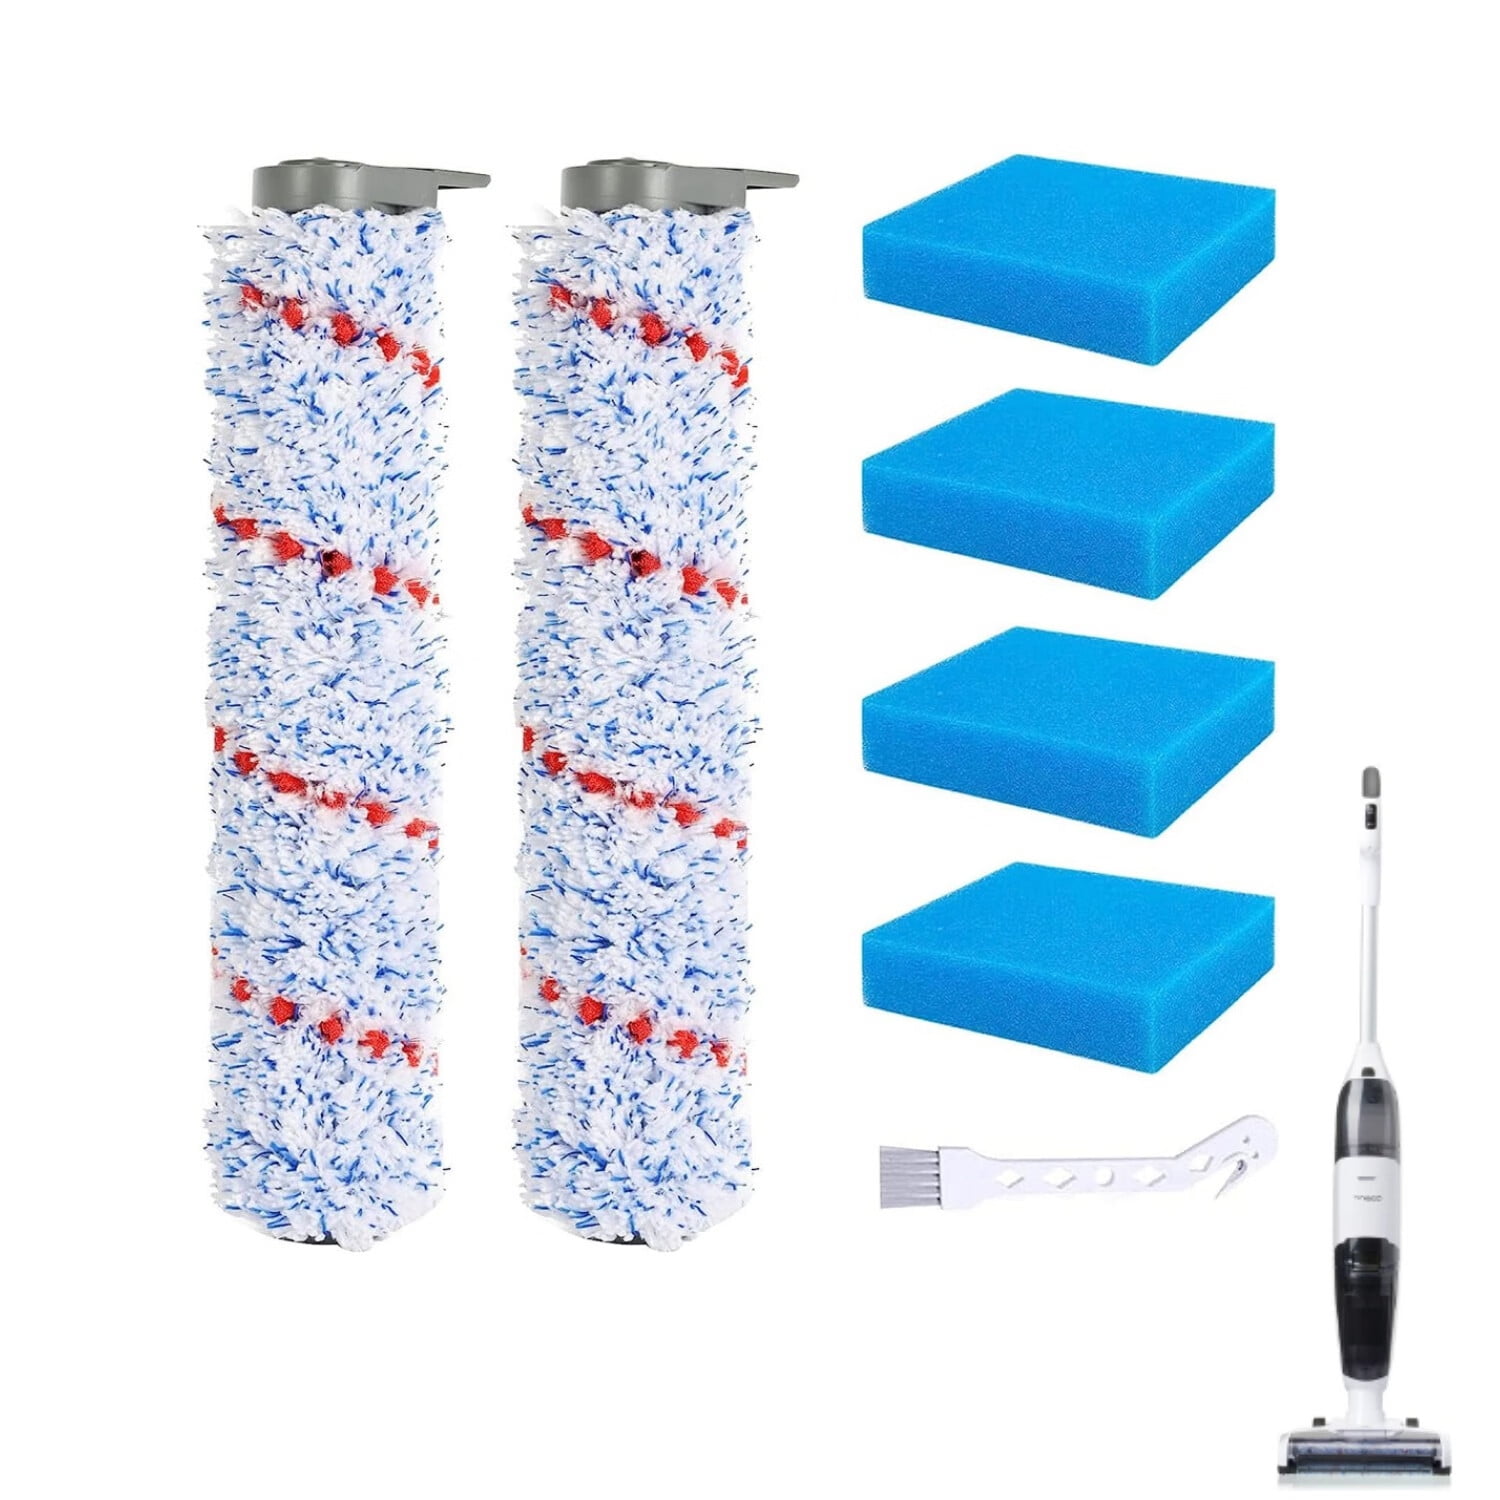 Filter Replacement Parts for Tineco iFloor 3/iFloor One S3 Cordless Wet Dry  Vacuum Cleaner Accessories, 2 Brush Rollers + 4 HEPA Filters + 1 Clean  Brush